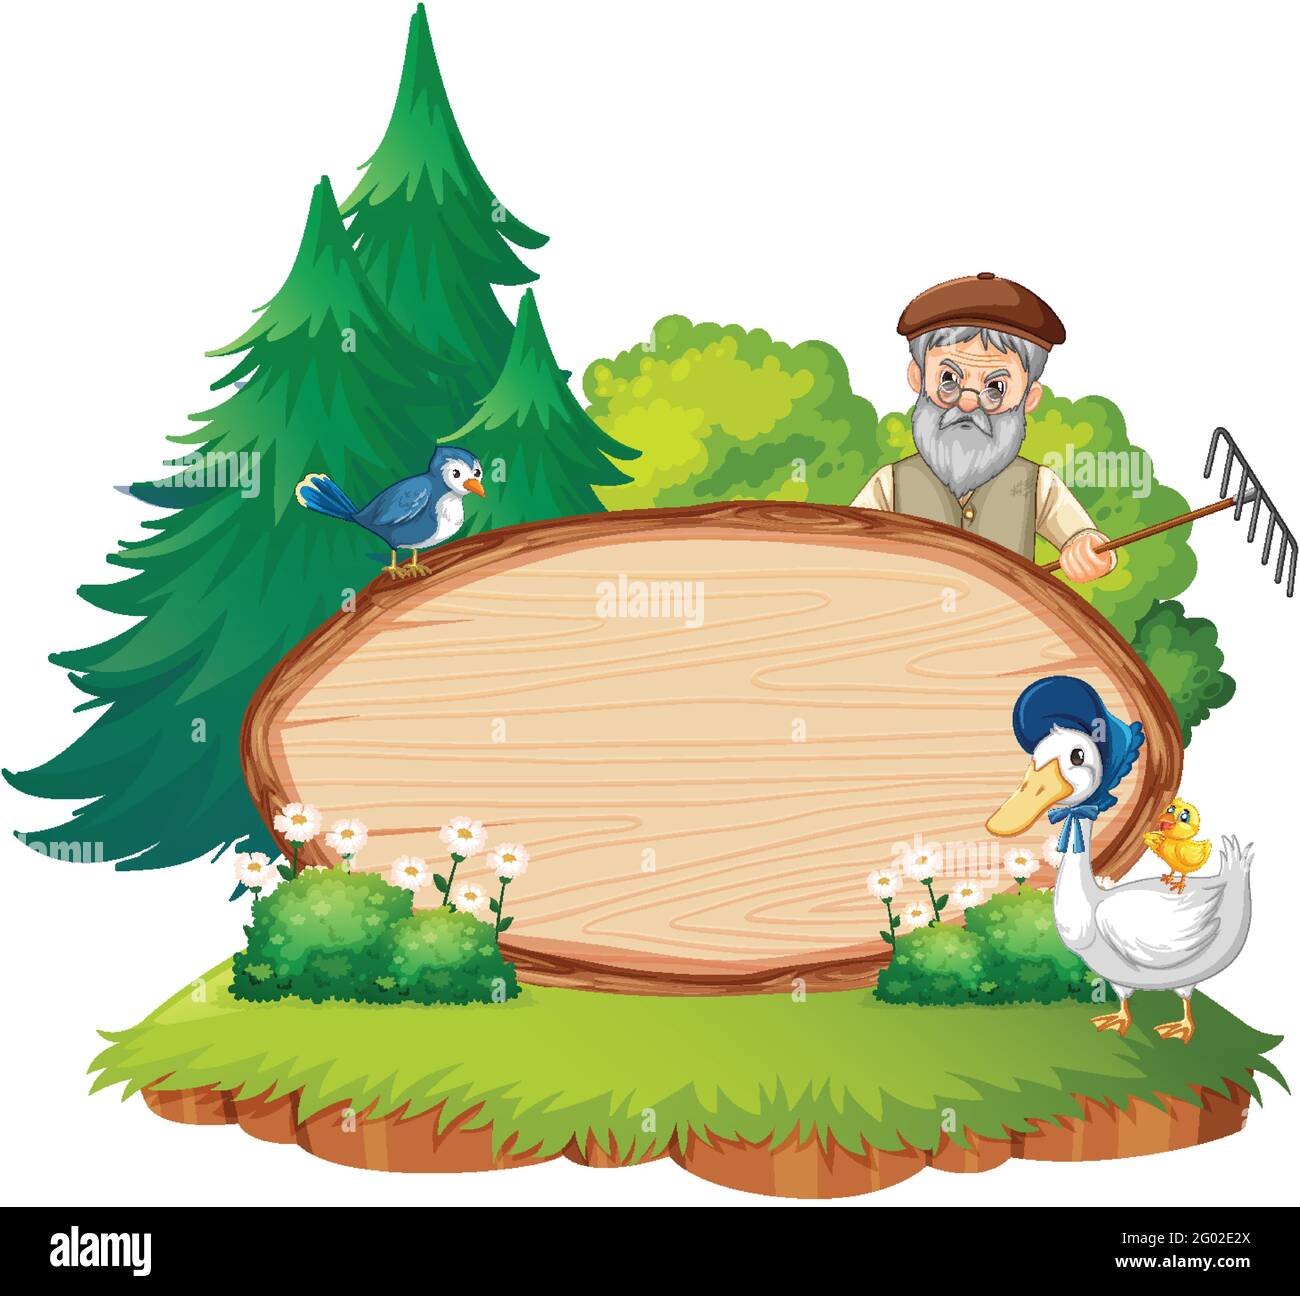 Empty banner template with old farmer man in the garden scene isolated illustration Stock Vector